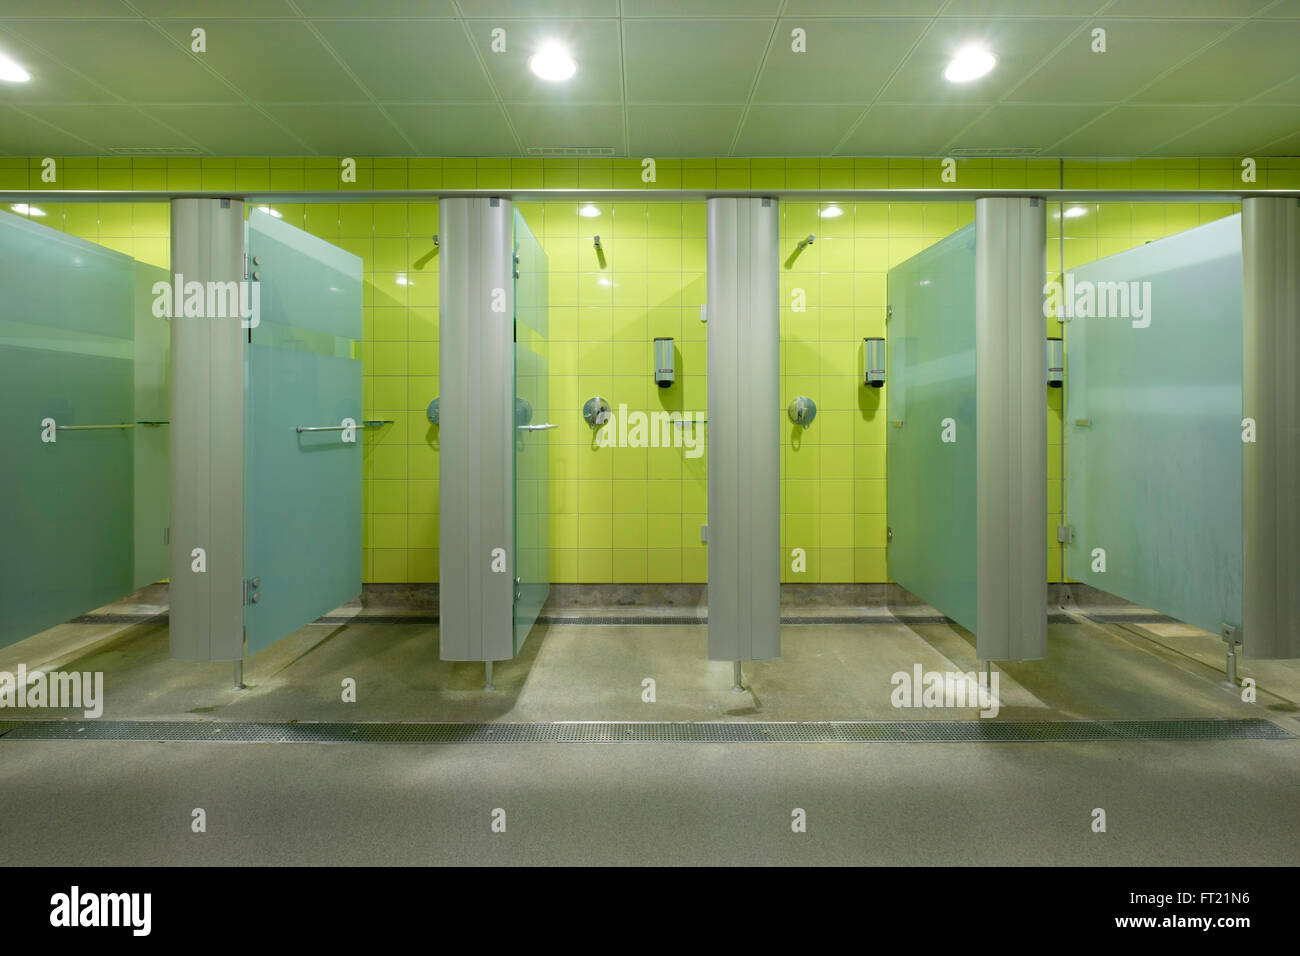 Shower cabins at the gym Stock Photo - Alamy